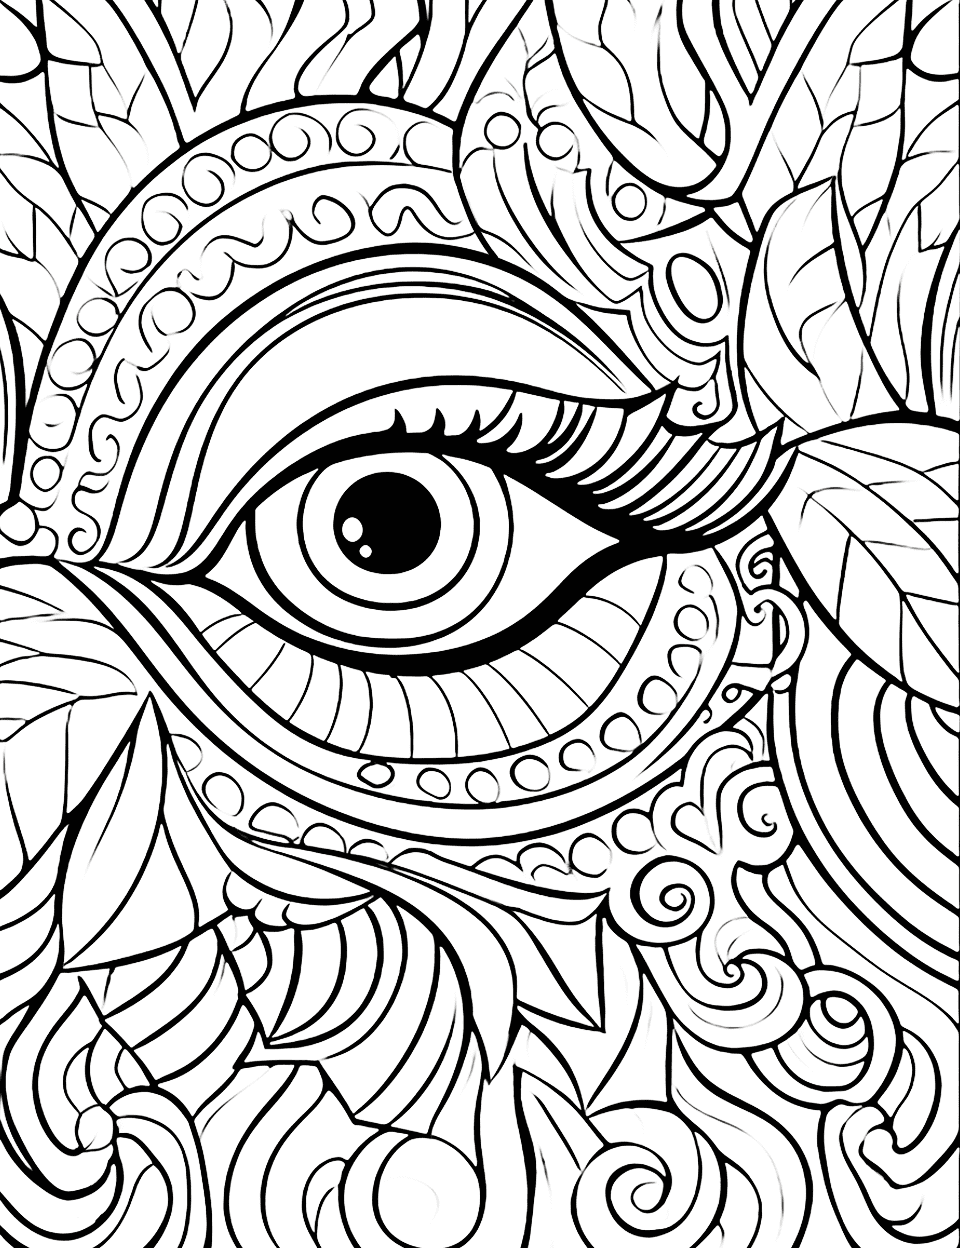 Abstract Eye Adult Coloring Page - An abstract design centered around a realistic eye, surrounded by swirling patterns and shapes.